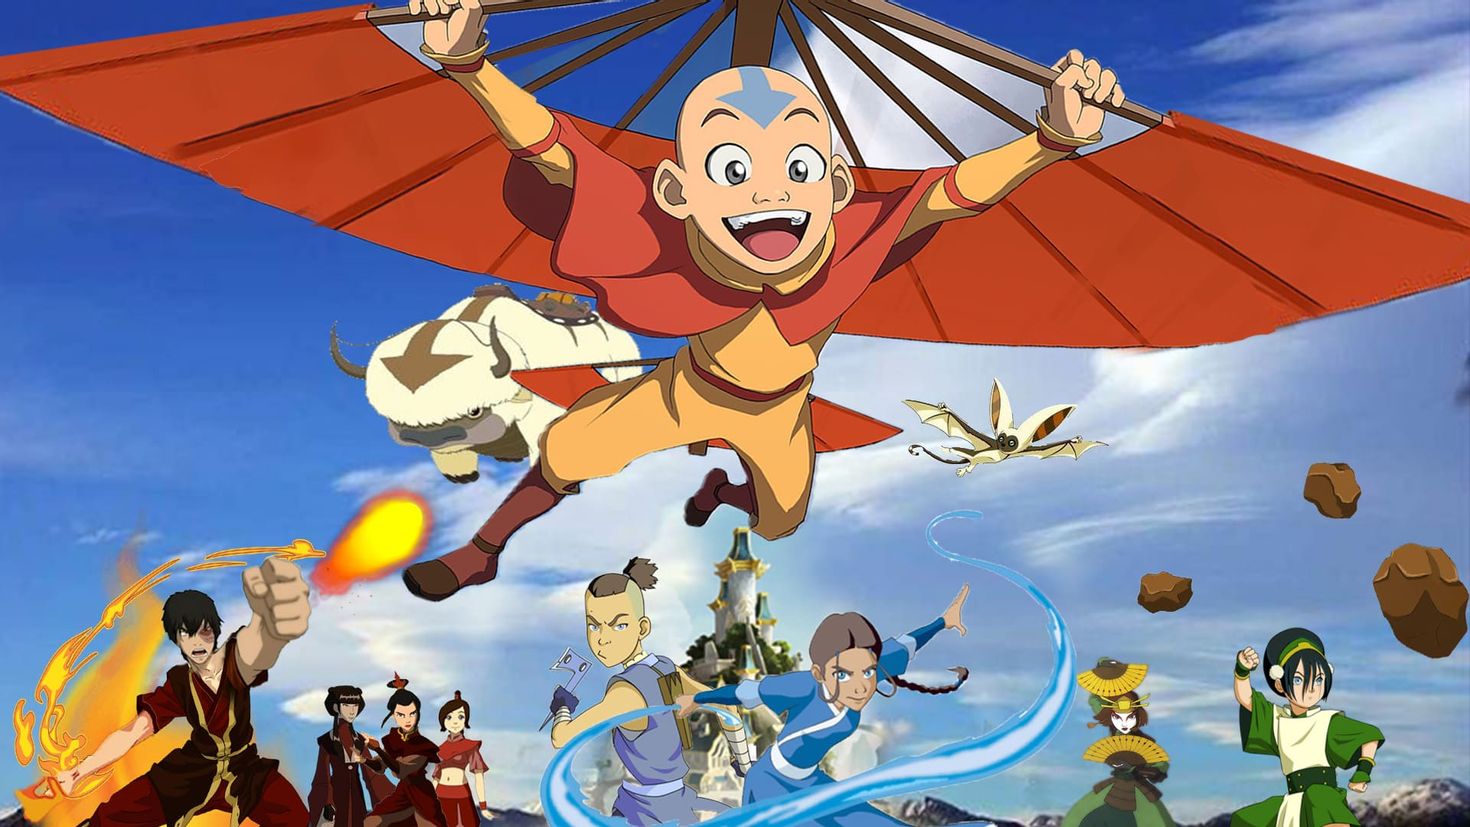 Avatar legend of aang english. Аватар аанг. Аватар Легенда об анг е.